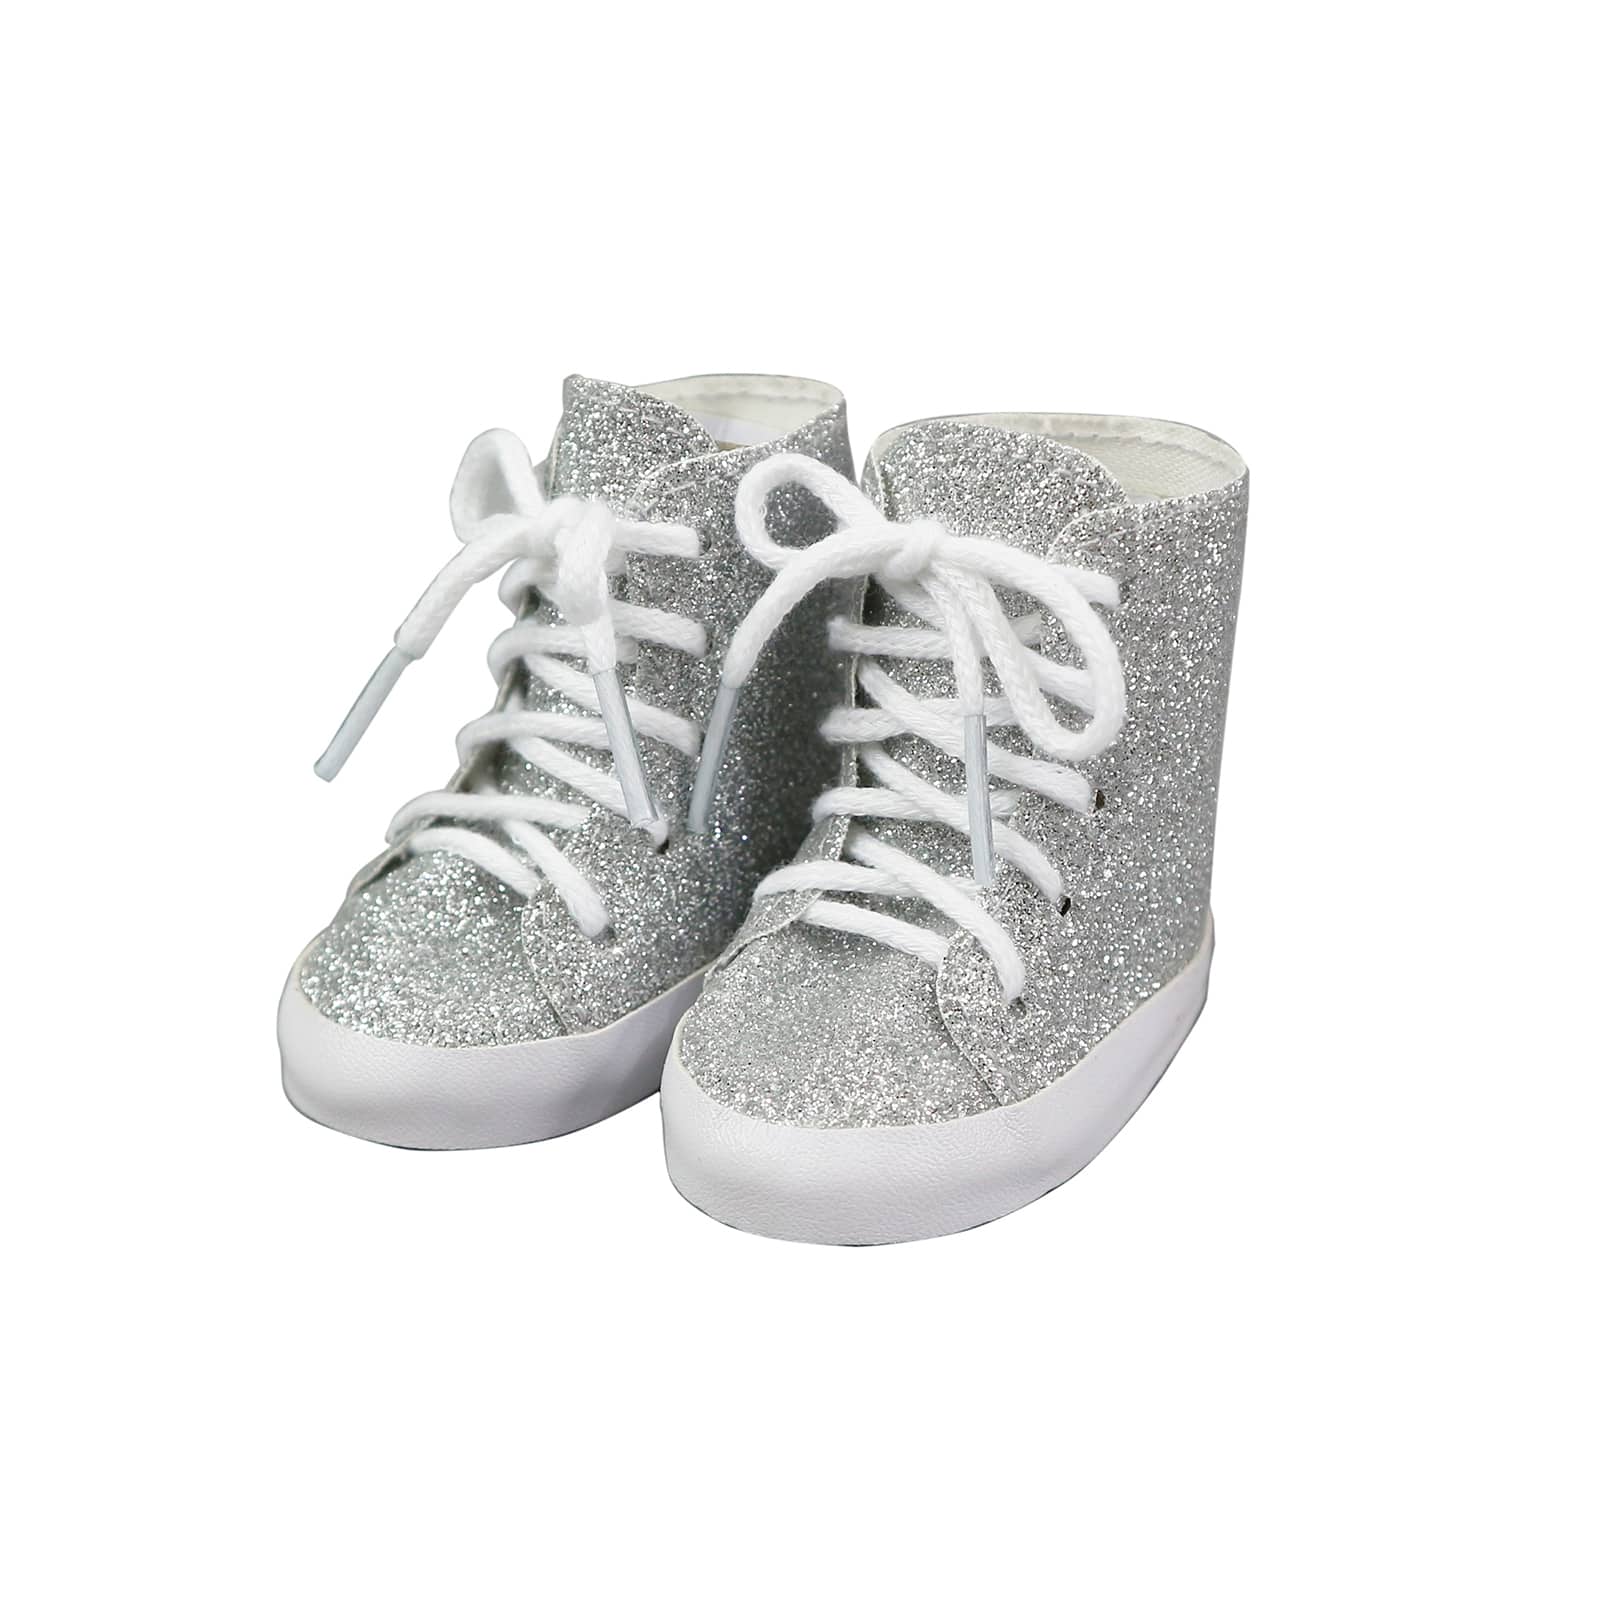 Shop for the Sparkle High Top Shoes for 